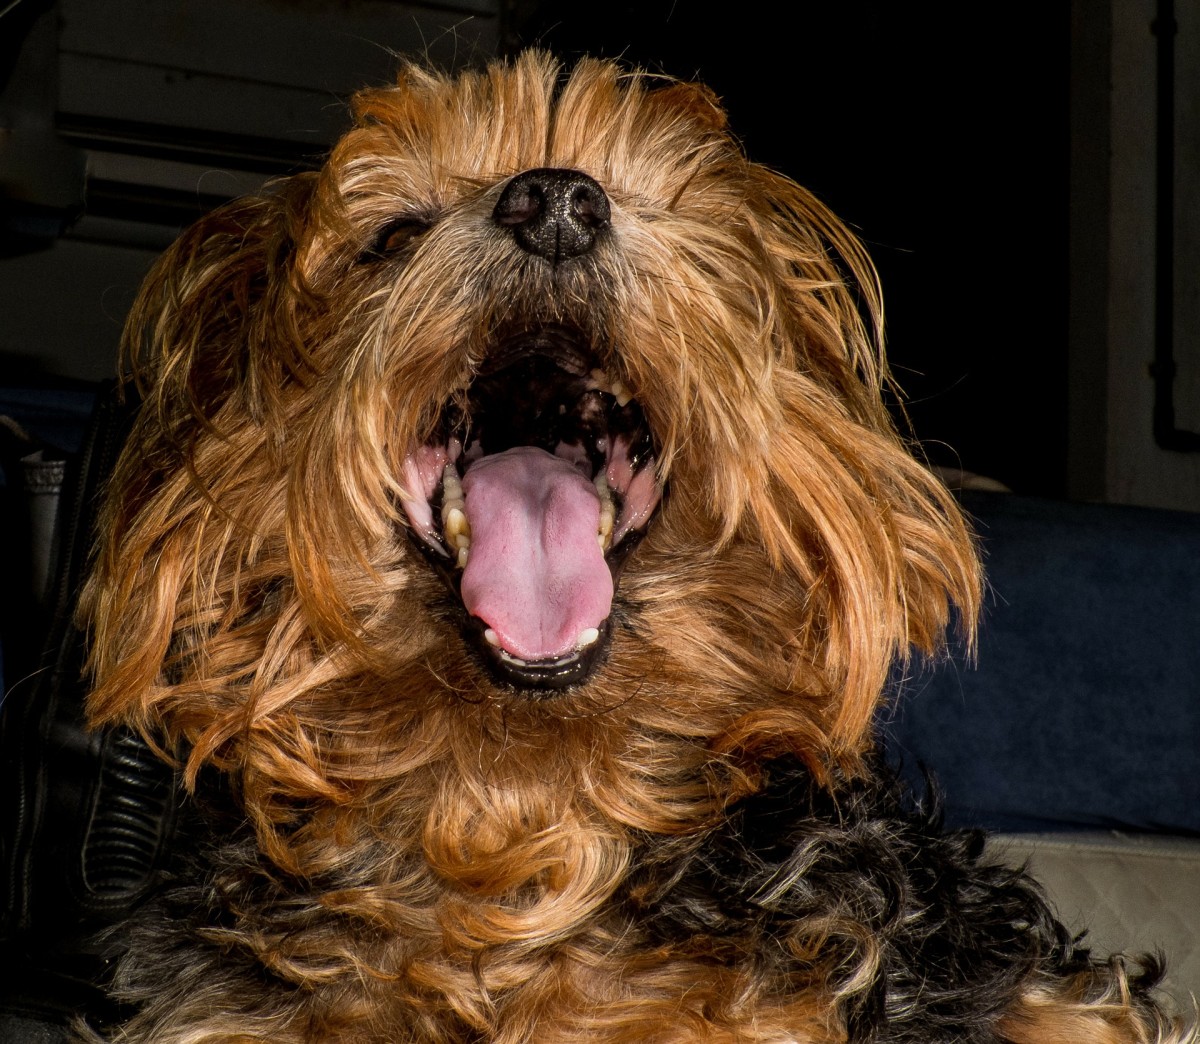 Learn about the causes of coughing in dogs and how your vet might diagnose
and treat it.